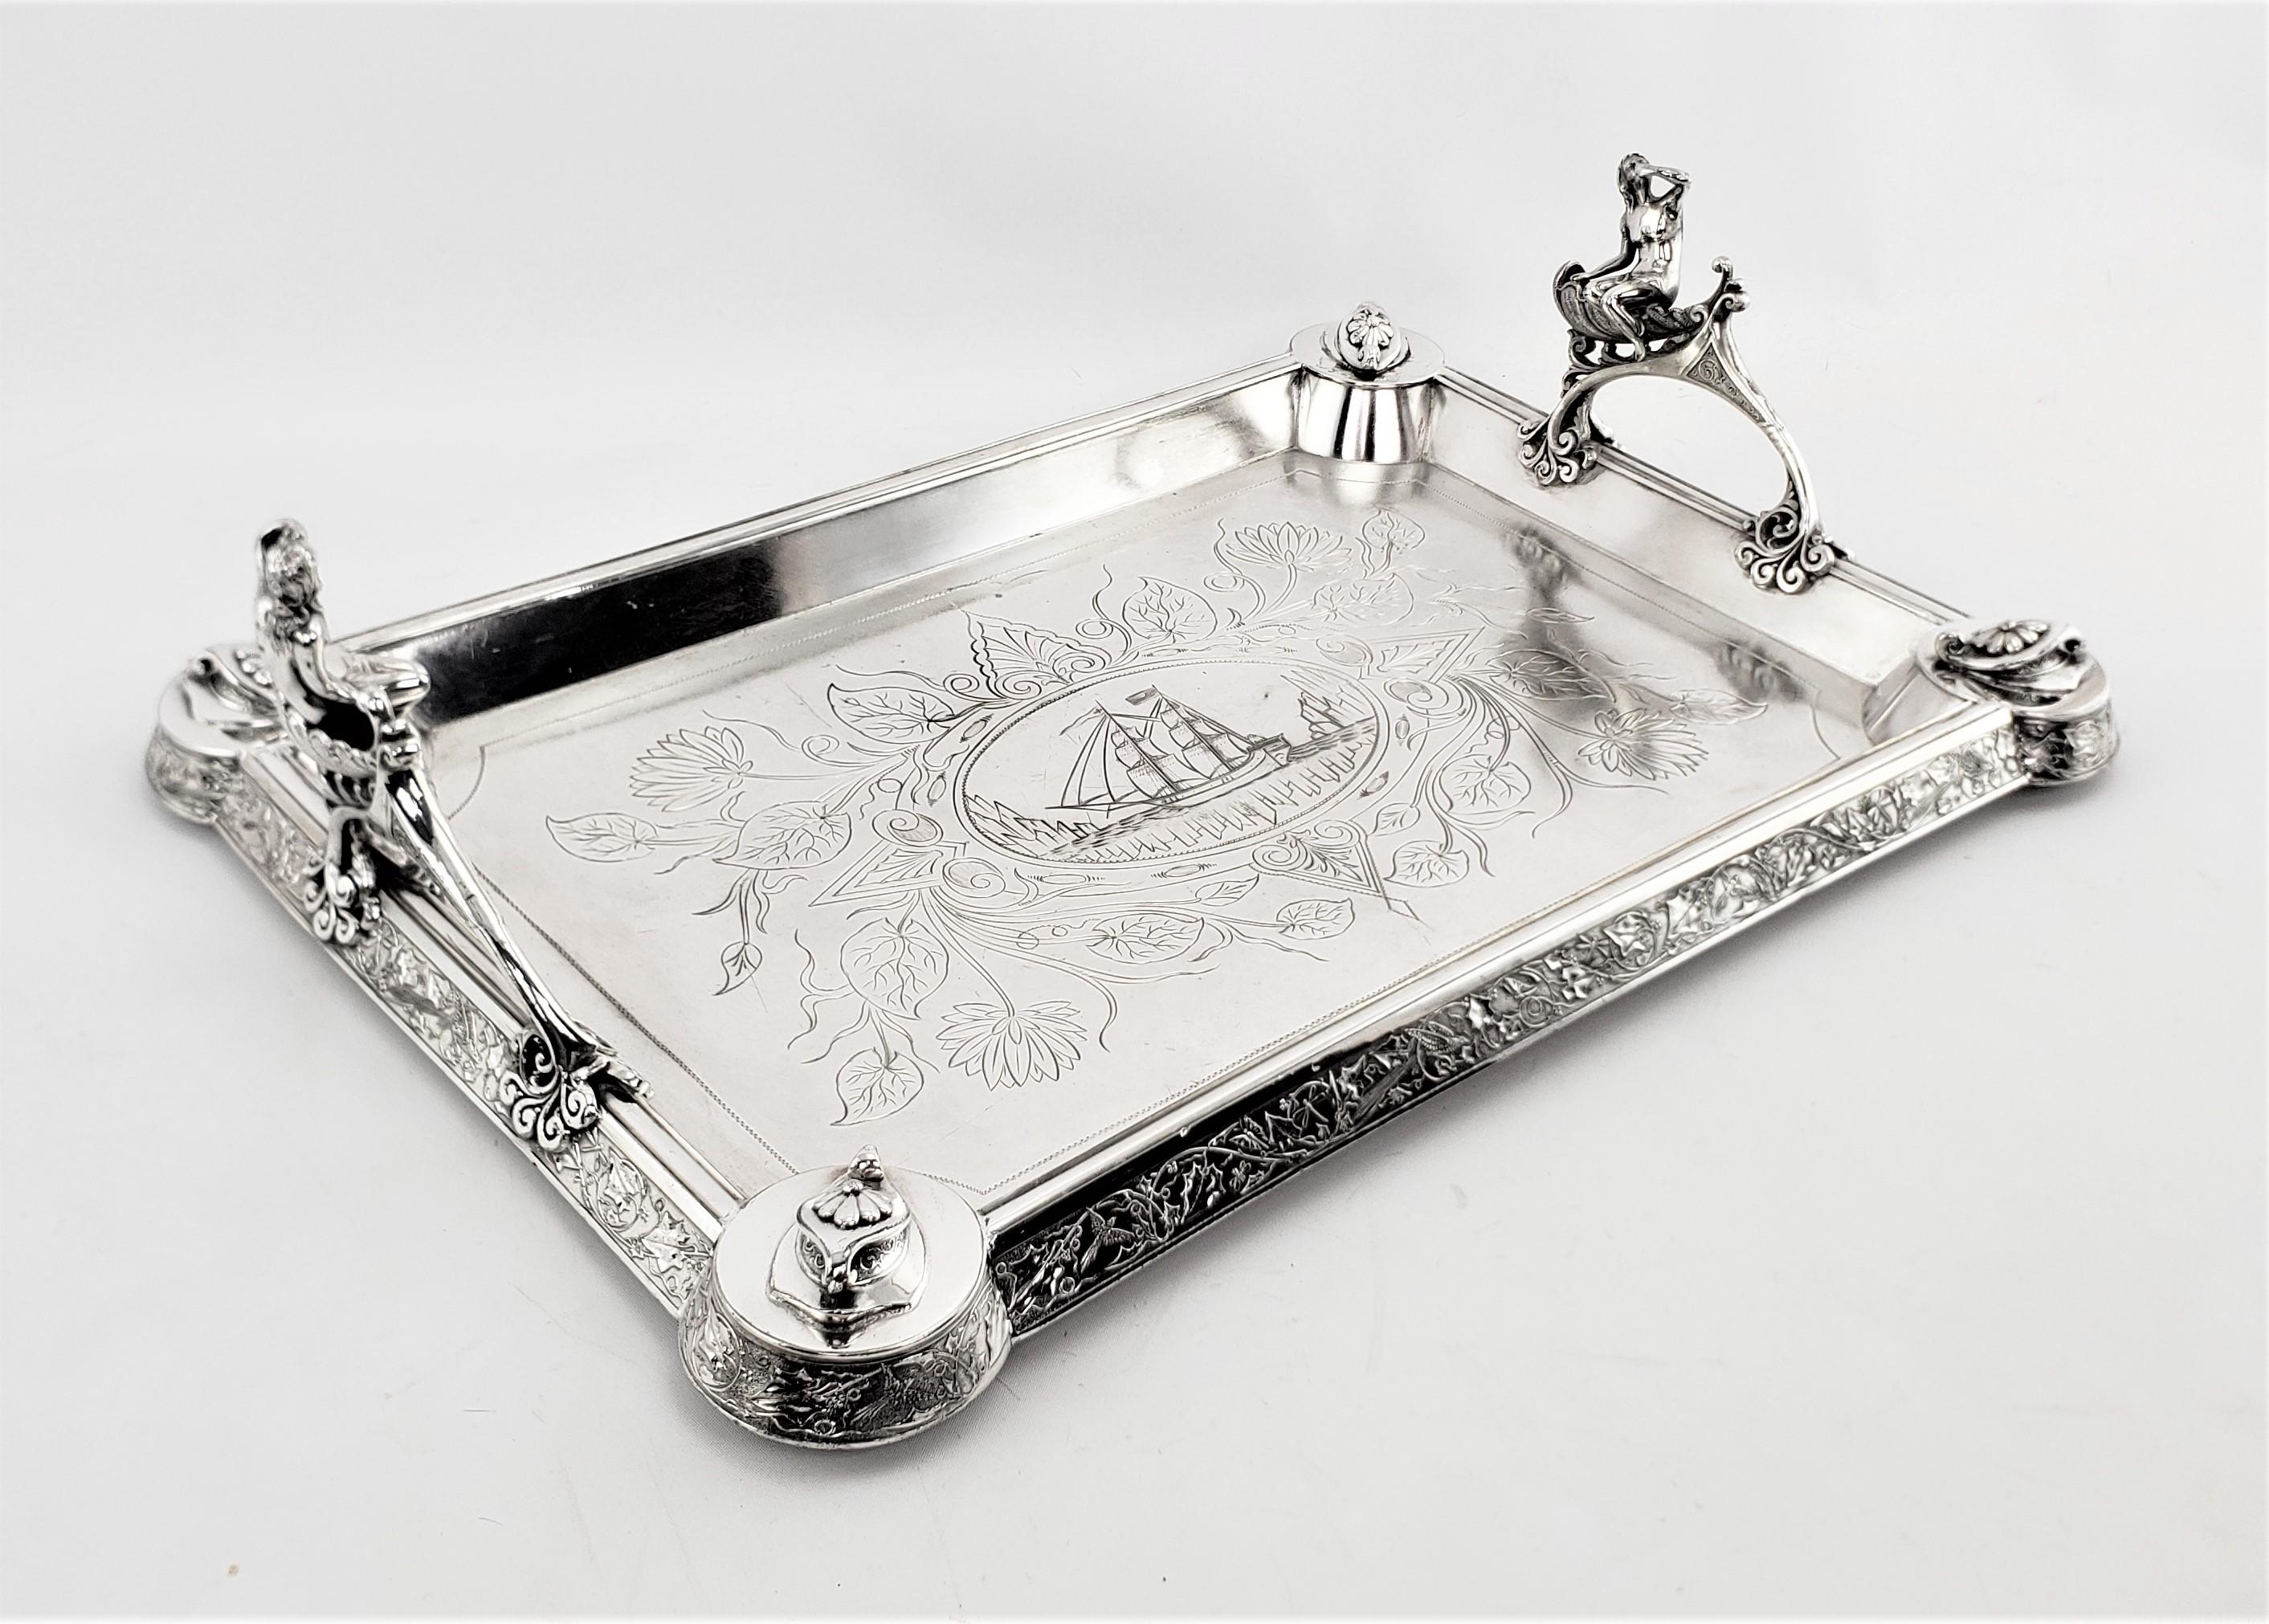 Antique Aesthetic Movement Silver Plated Serving Tray with Figural Siren Handles For Sale 9